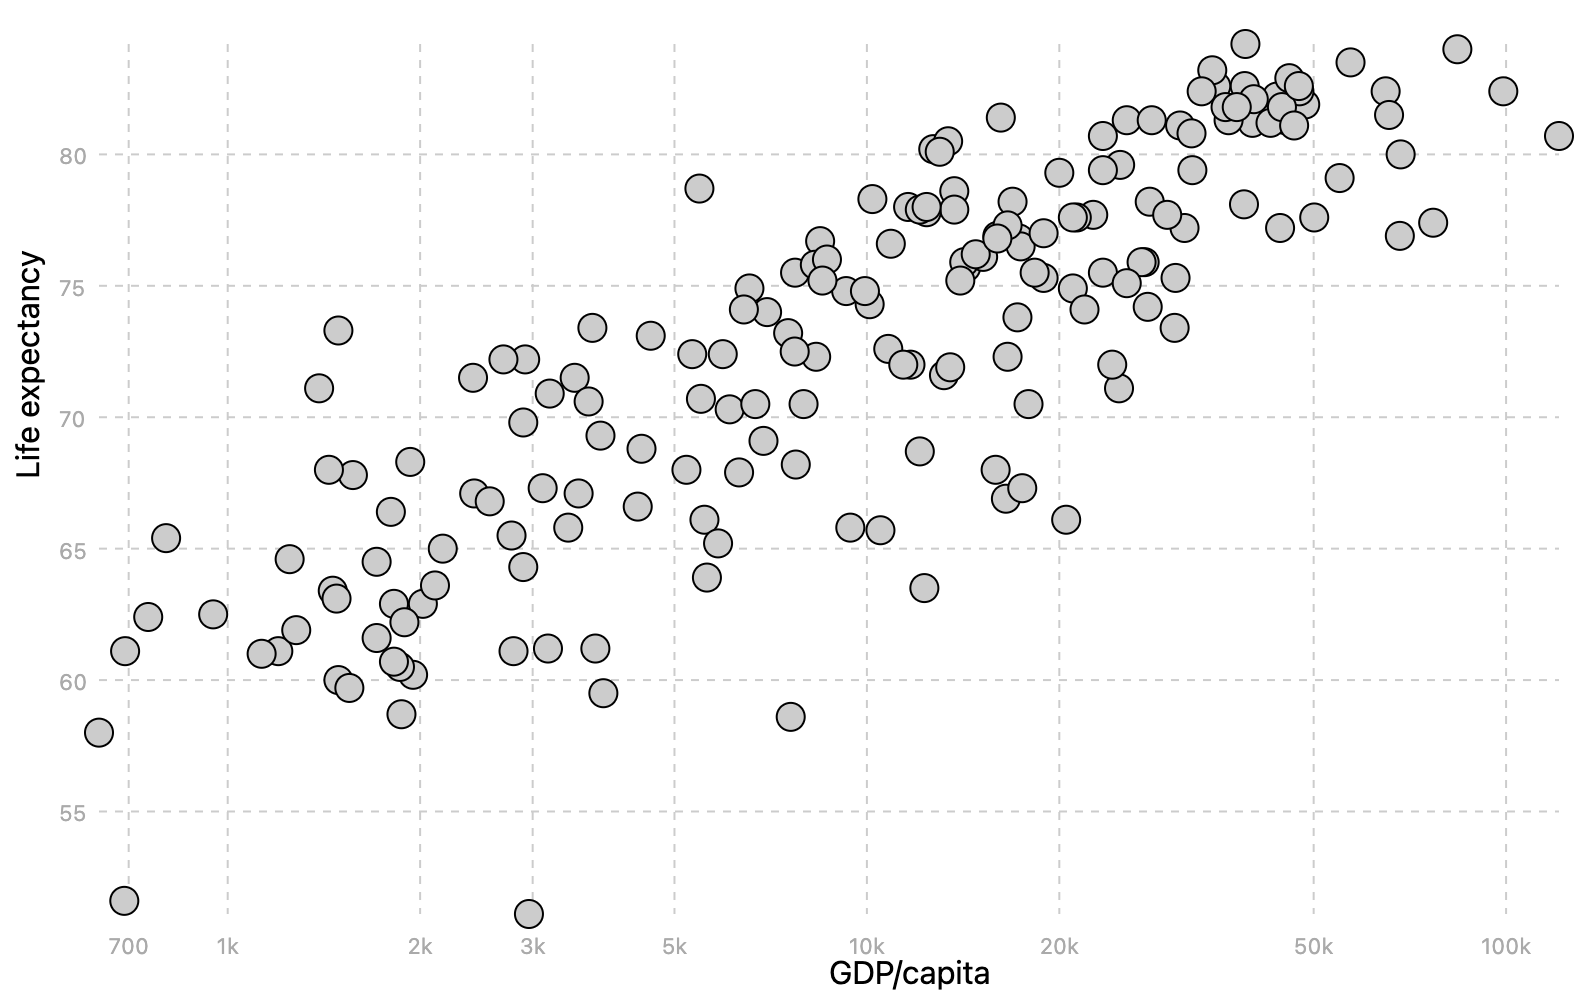 A scatter plot showing country values of life expectancy (y axis) and GDP/capita (x axis)